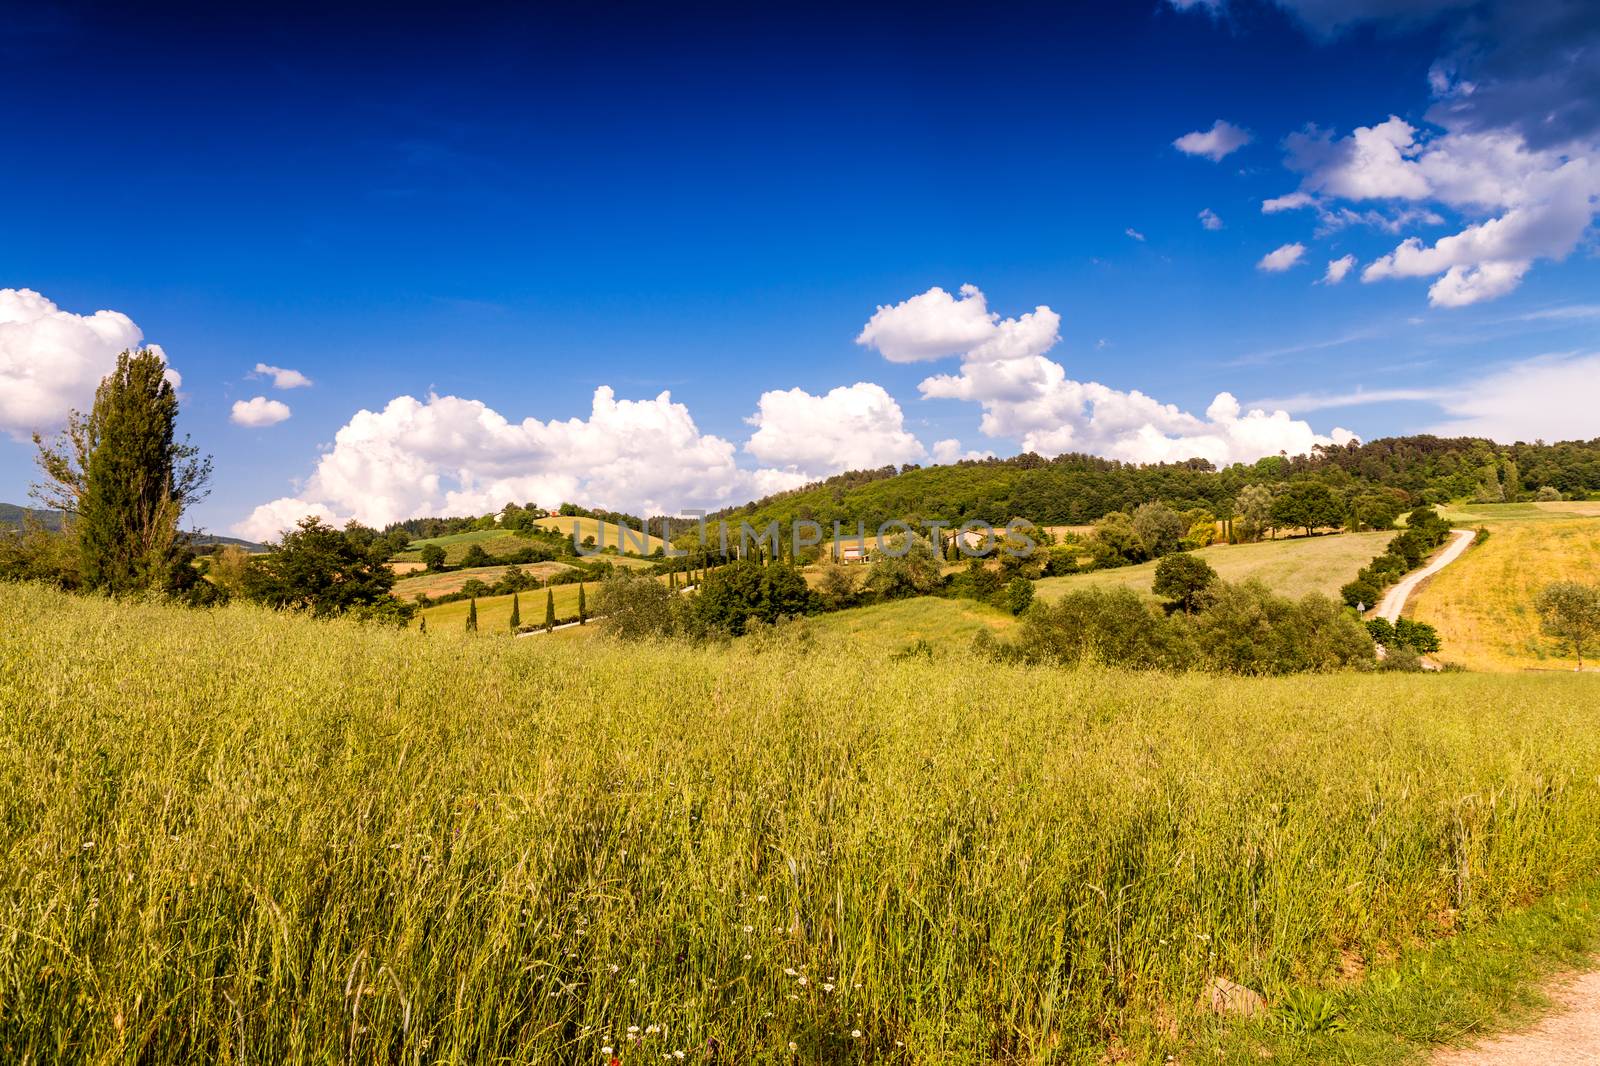 Tuscany. Hills in spring season, Italy by jovannig